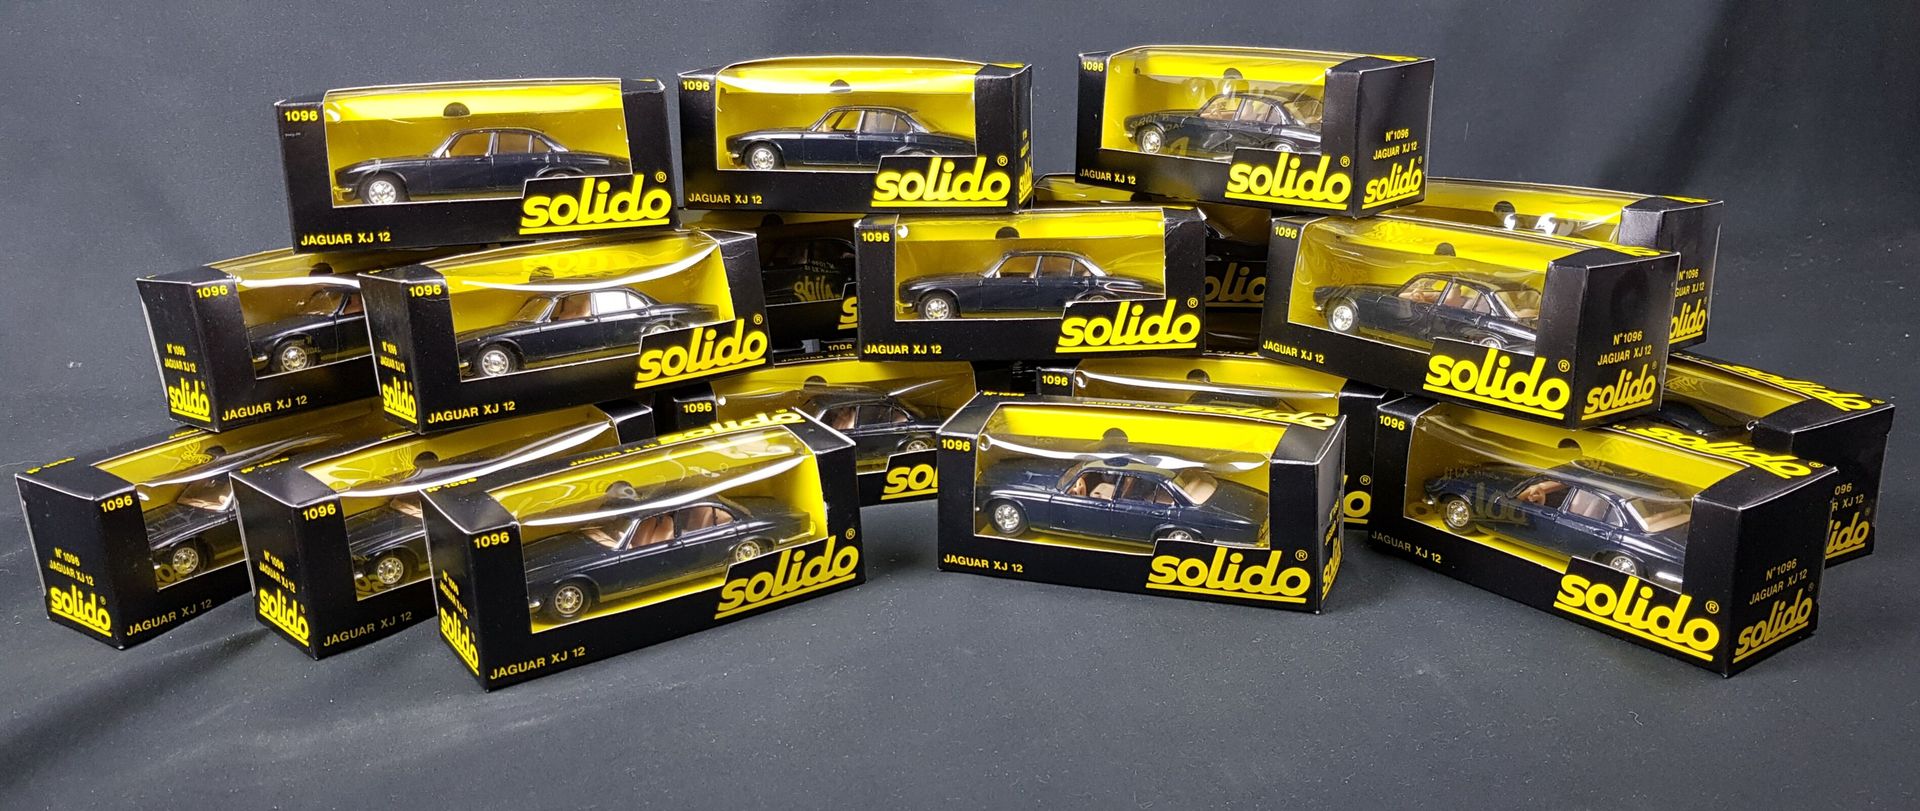 Null SOLIDO - 21 Jaguar XJ 12 n°1096, scale 1/43 in their original boxes